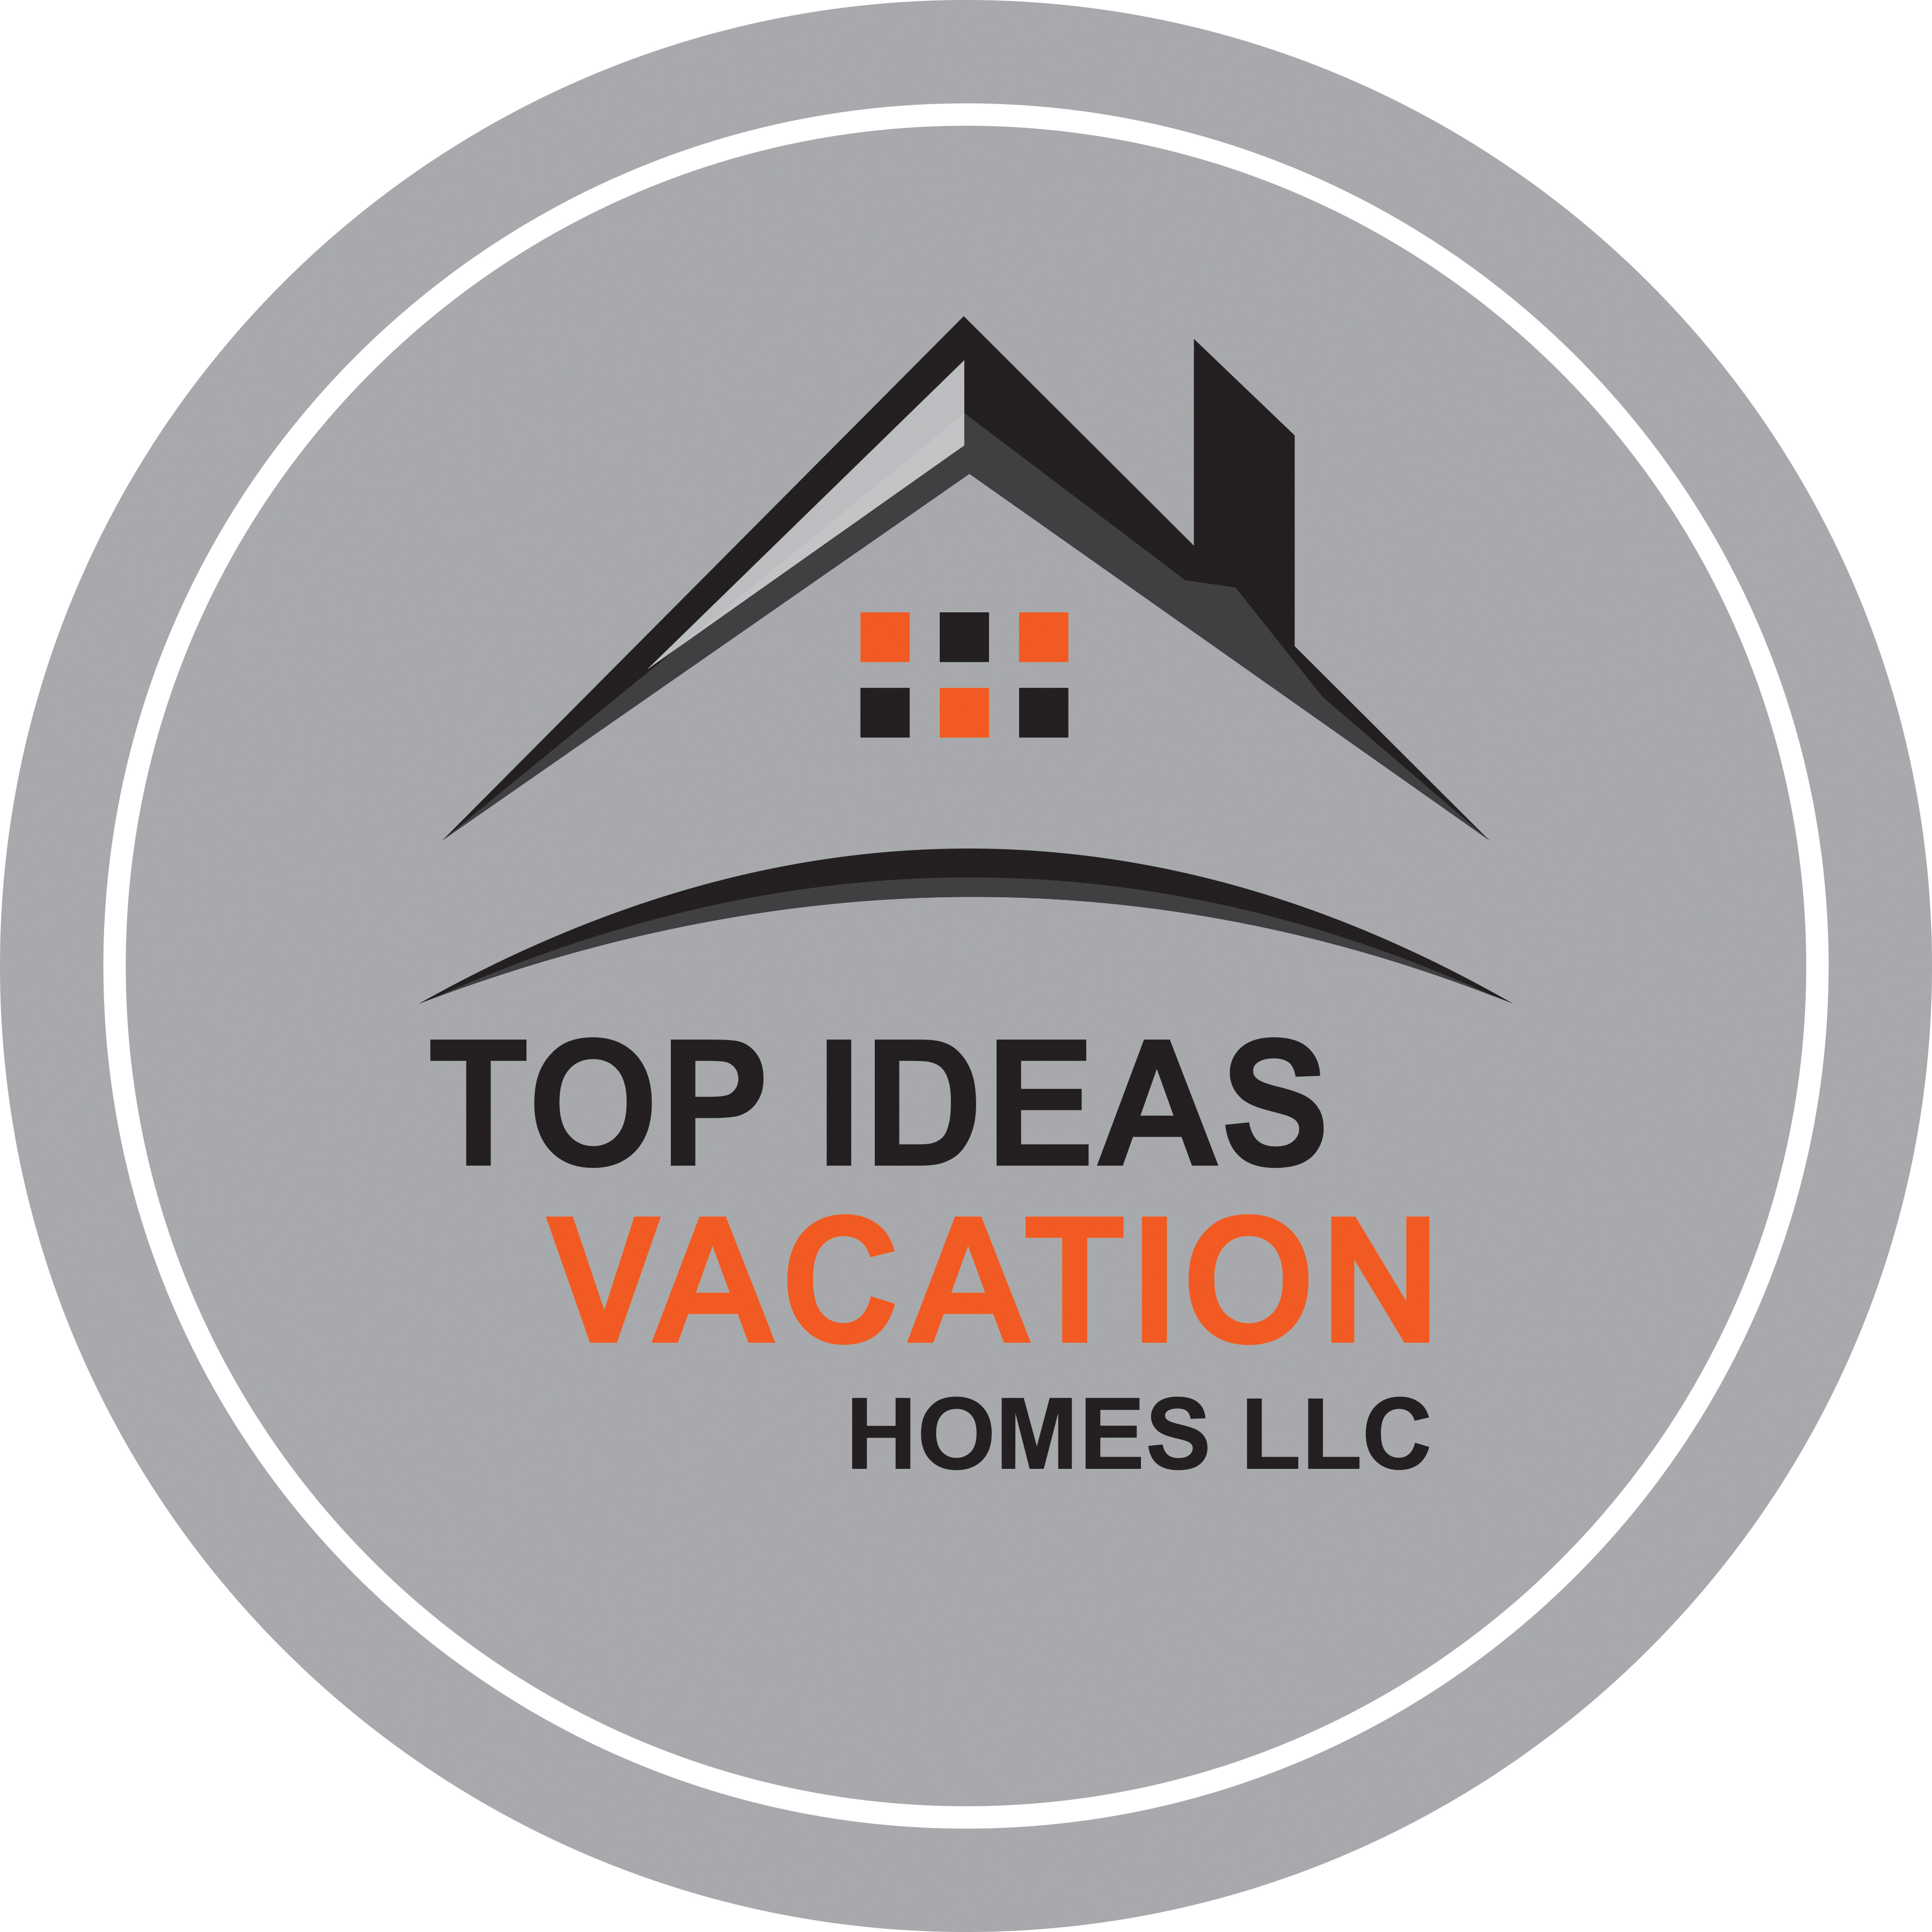 Top Ideas Vacation Homes